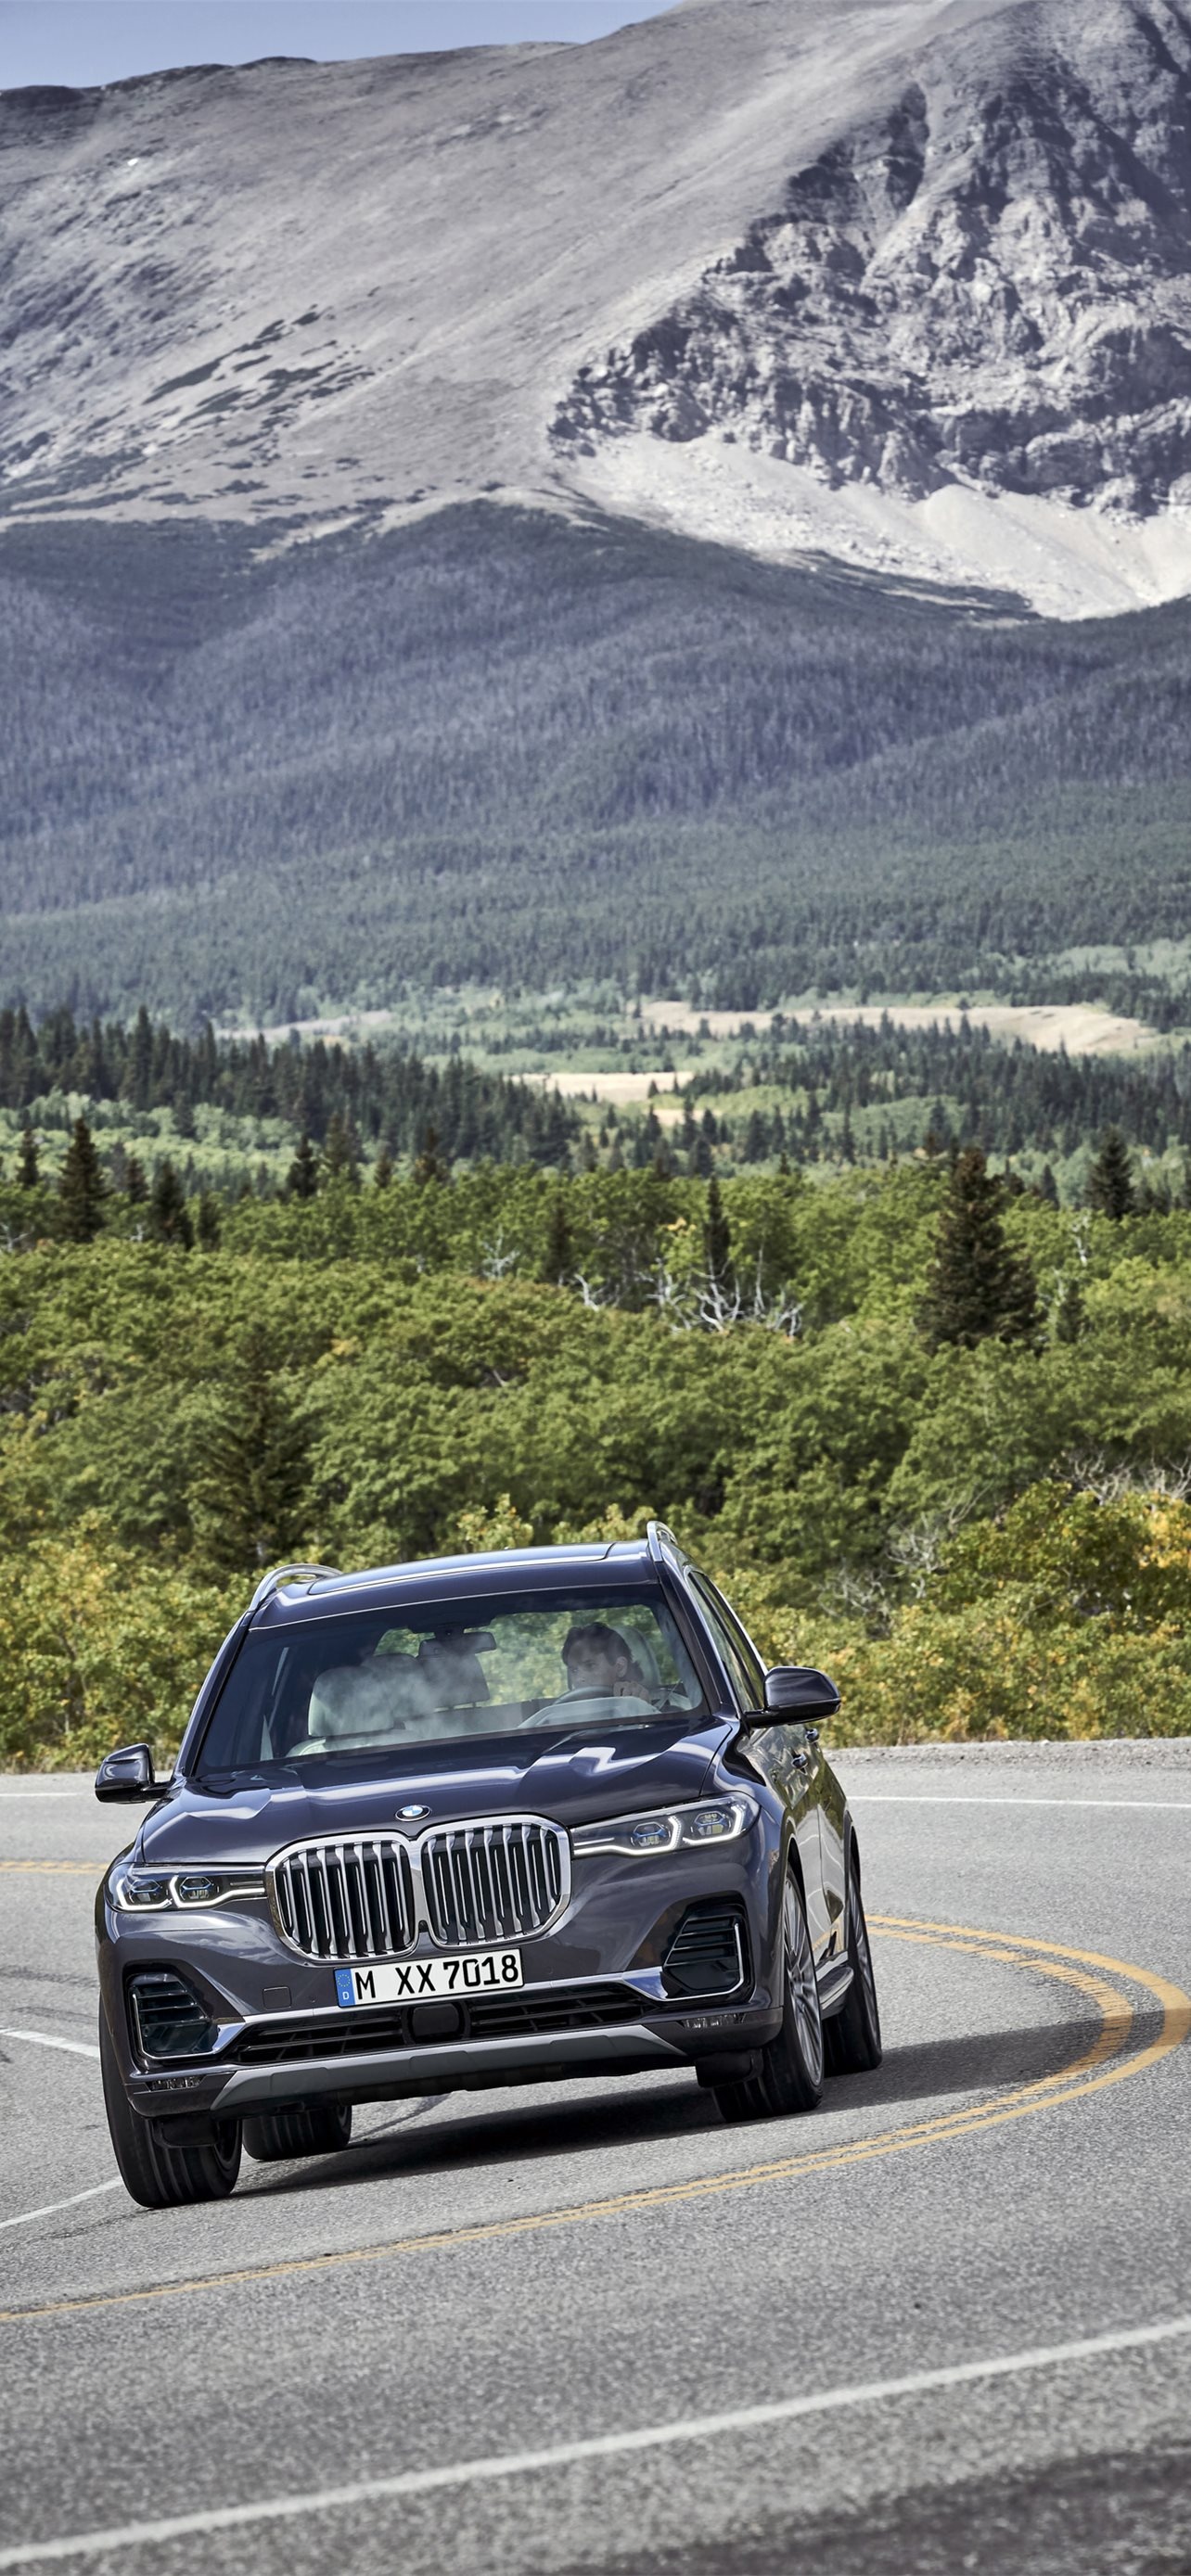 BMW X7, Best iPhone wallpapers, Elegant luxury, Sophisticated style, 1290x2780 HD Phone